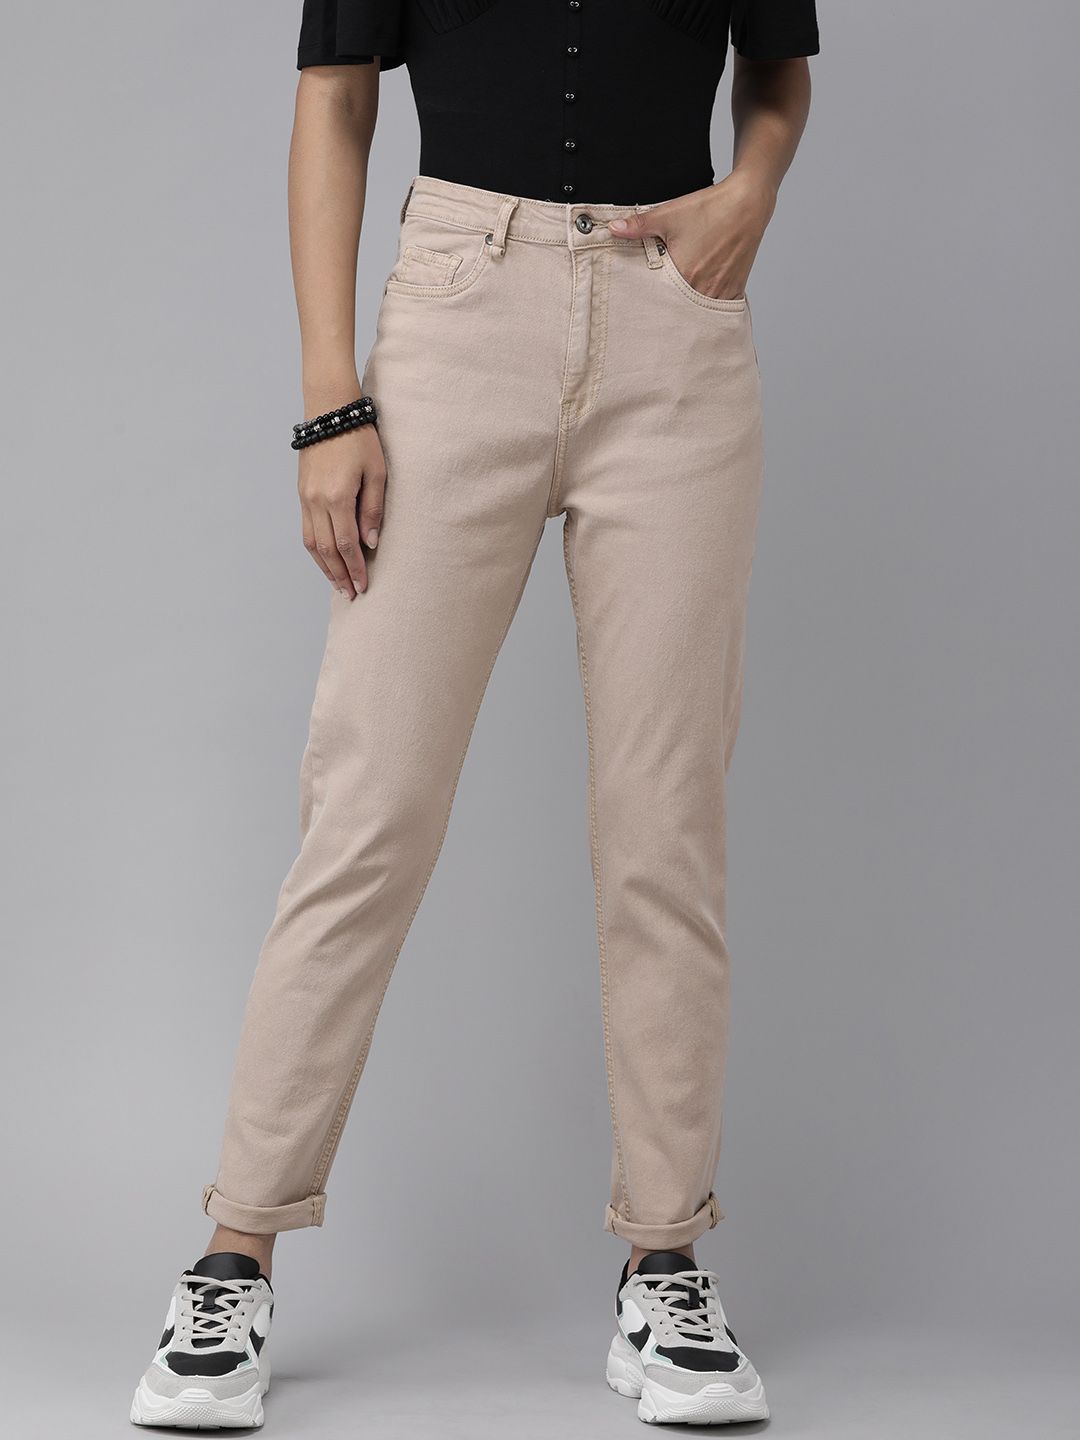 Roadster Women Beige Boyfriend Fit High-Rise Stretchable Jeans Price in India